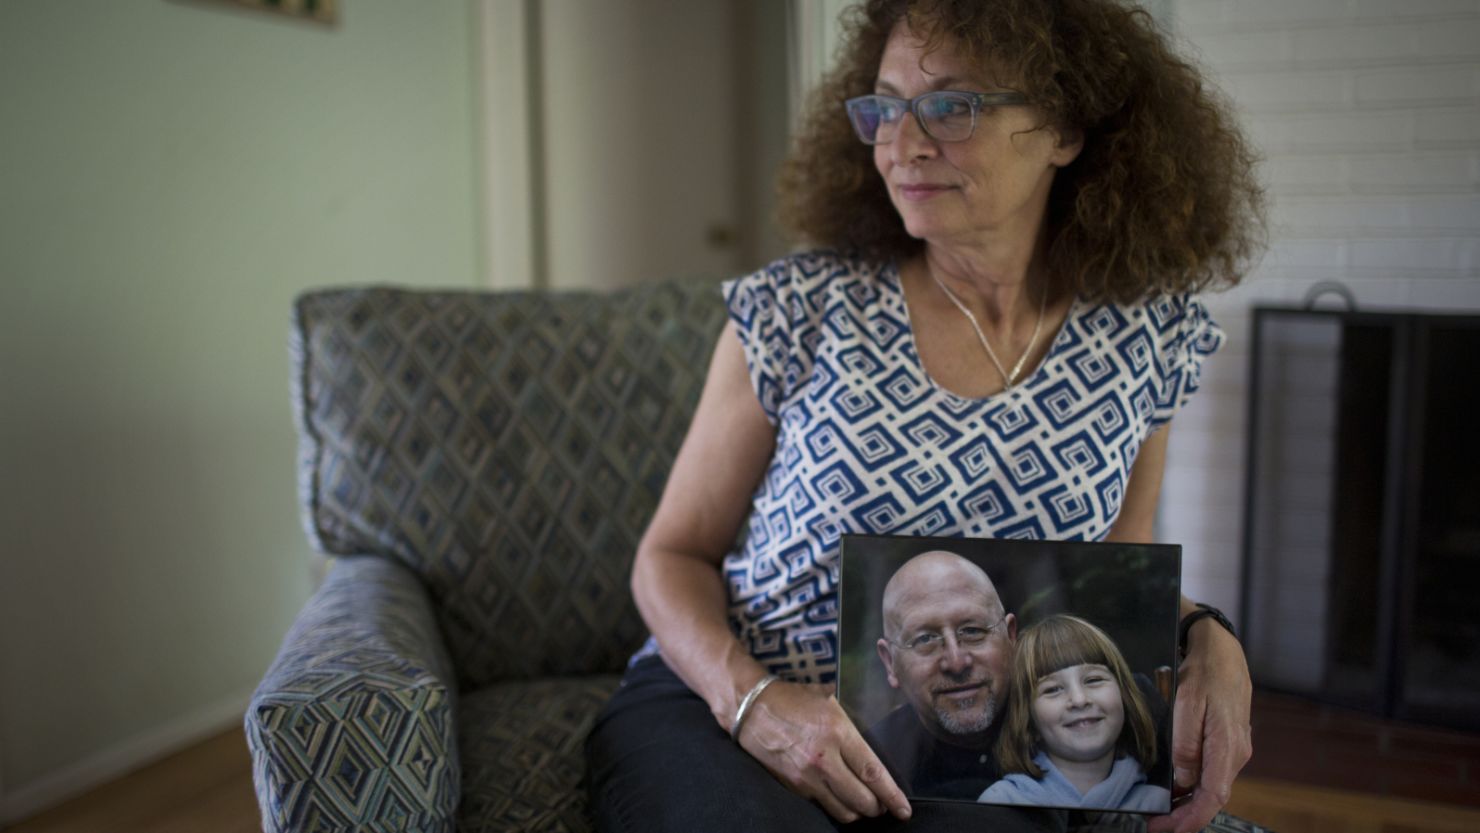 Nora Zamichow says if she and her husband, Mark Saylor, had known how doctors die, they may have made different treatment decisions for him at the end of his life.